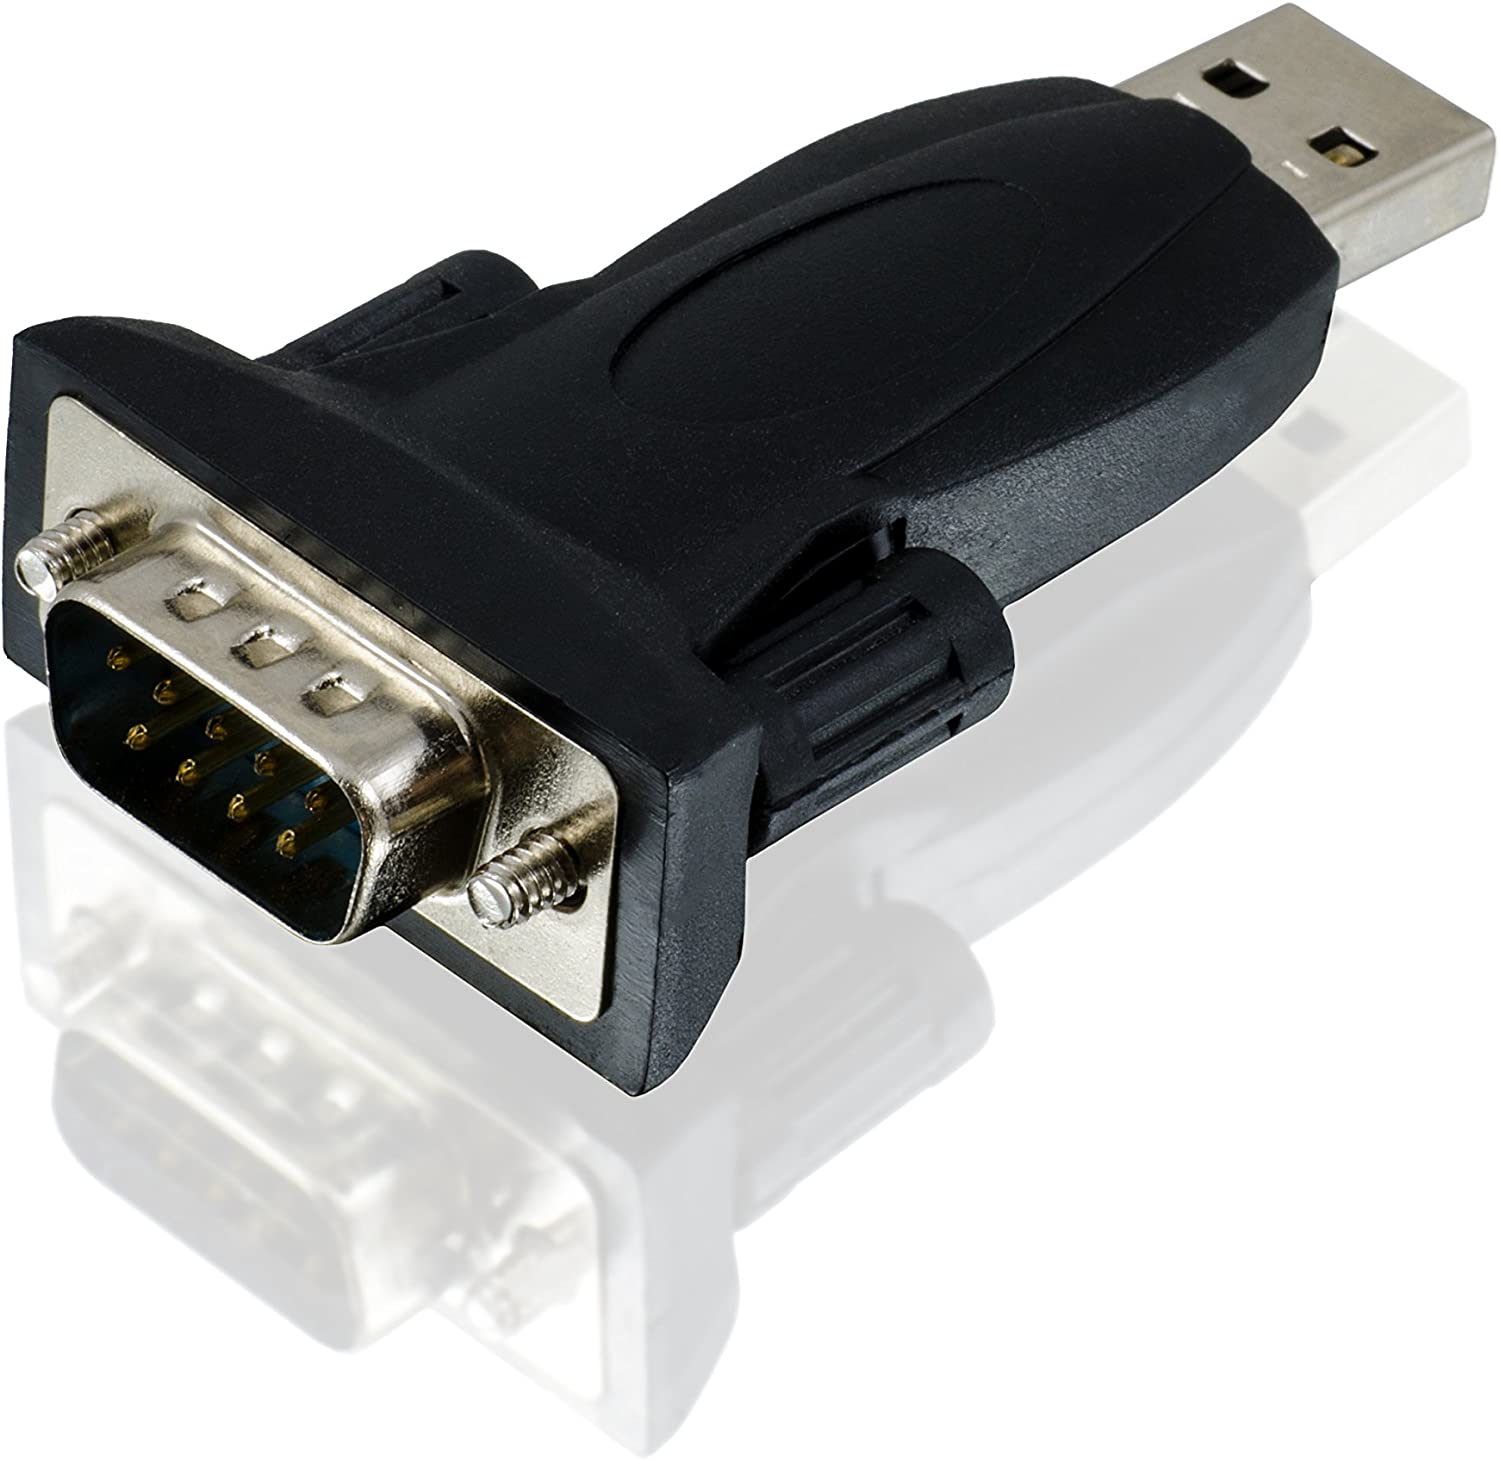 Usb To Rs232 Serial Port Adapter | Hot Sex Picture